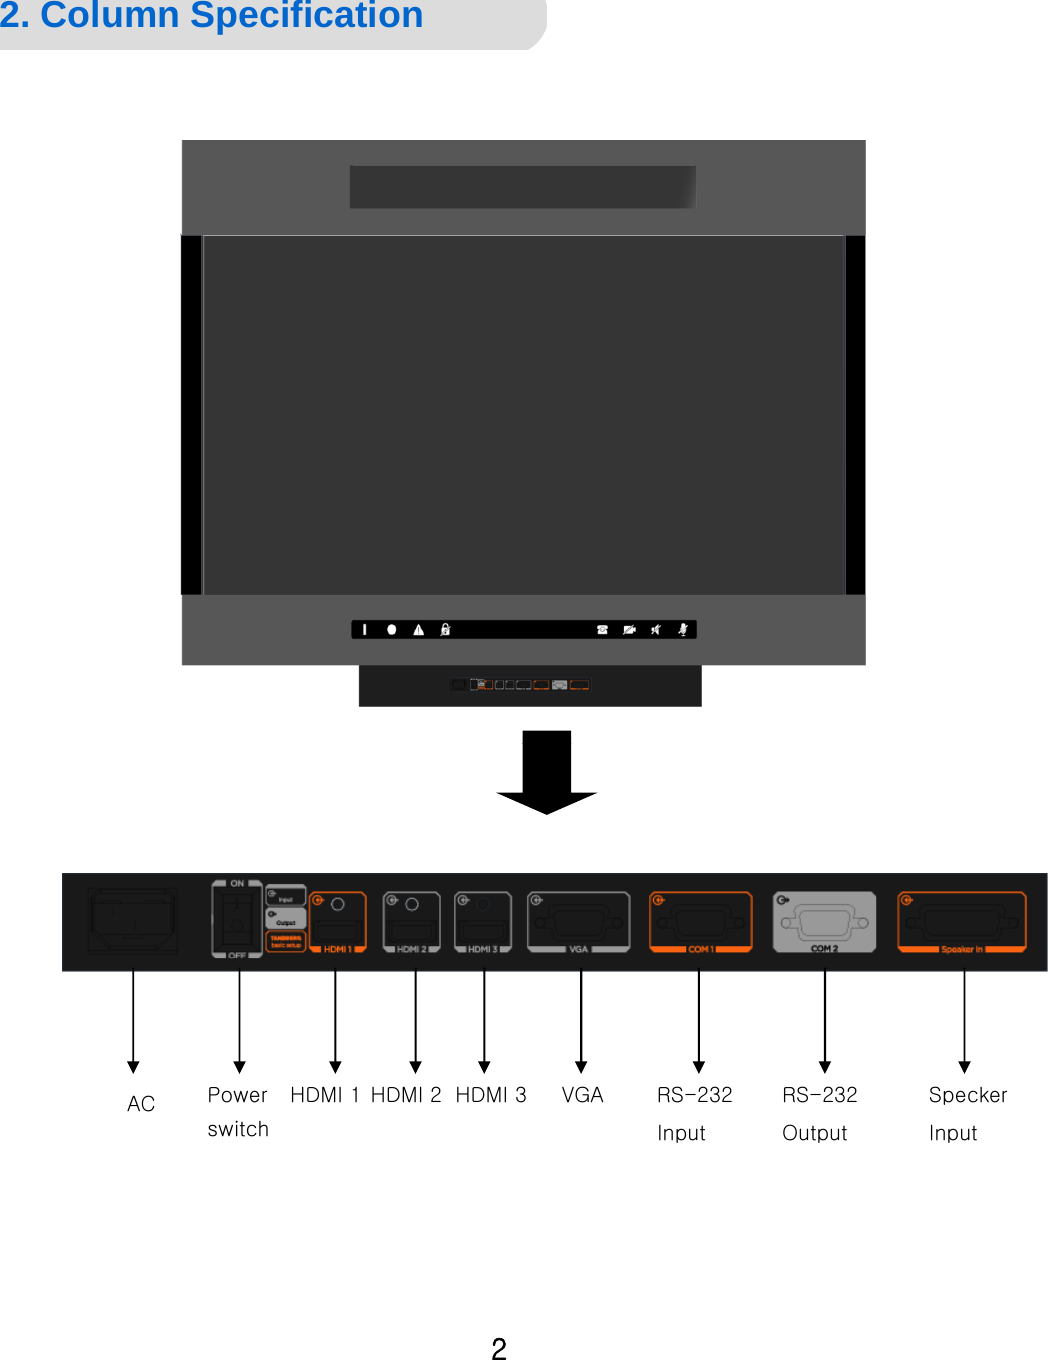 2. Column SpecificationPower switchAC HDMI 1 HDMI 2 HDMI 3 RS-232InputRS-232OutputSpeckerInputVGAGeneral Specification  2